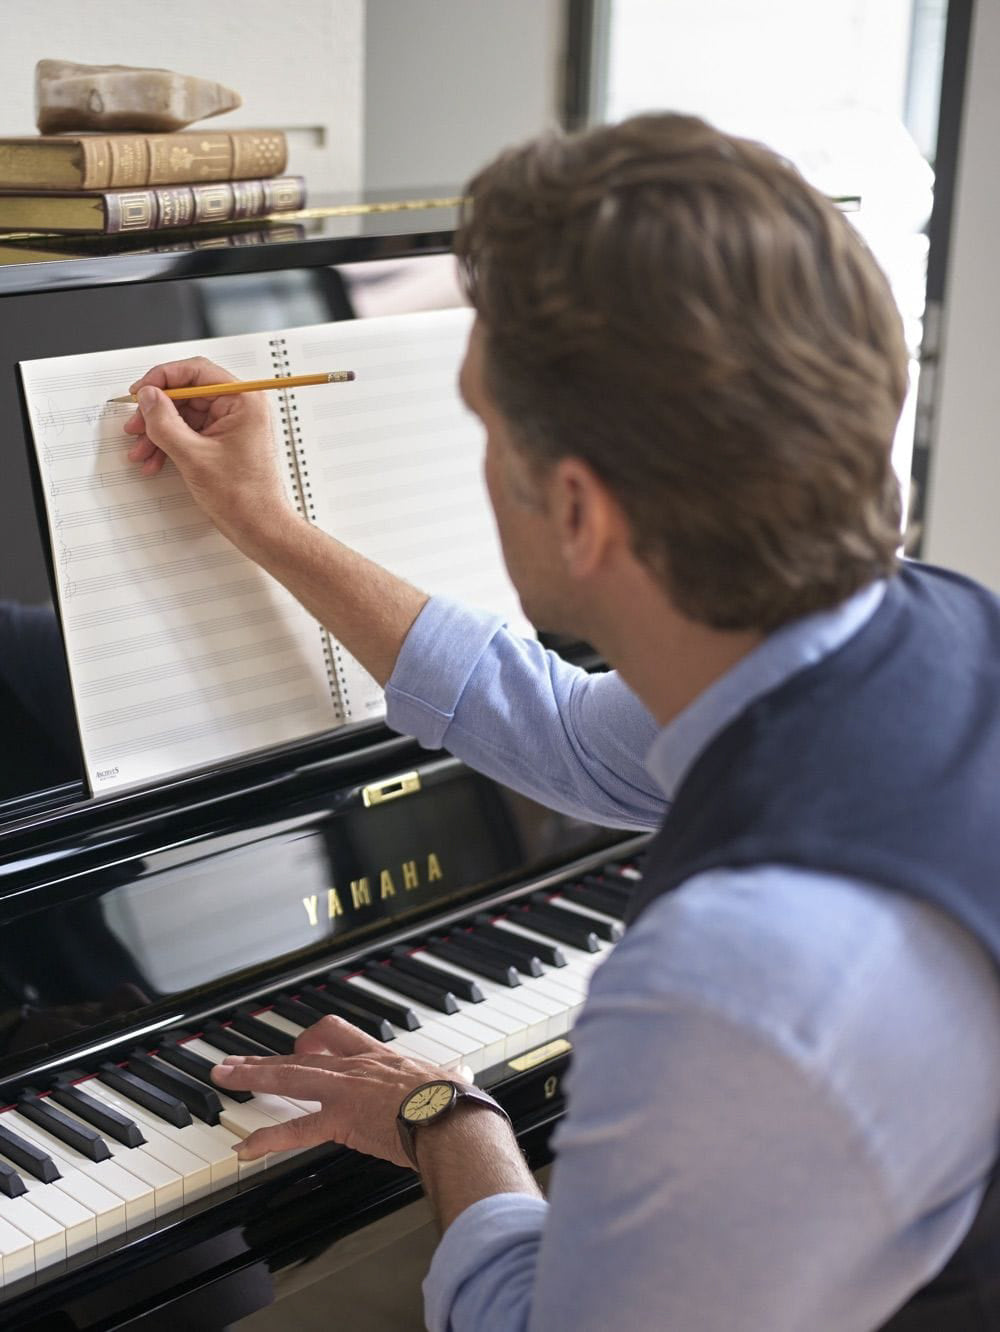 Composer sitting at a Yamaha piano, writing music on a staff paper with a pencil.